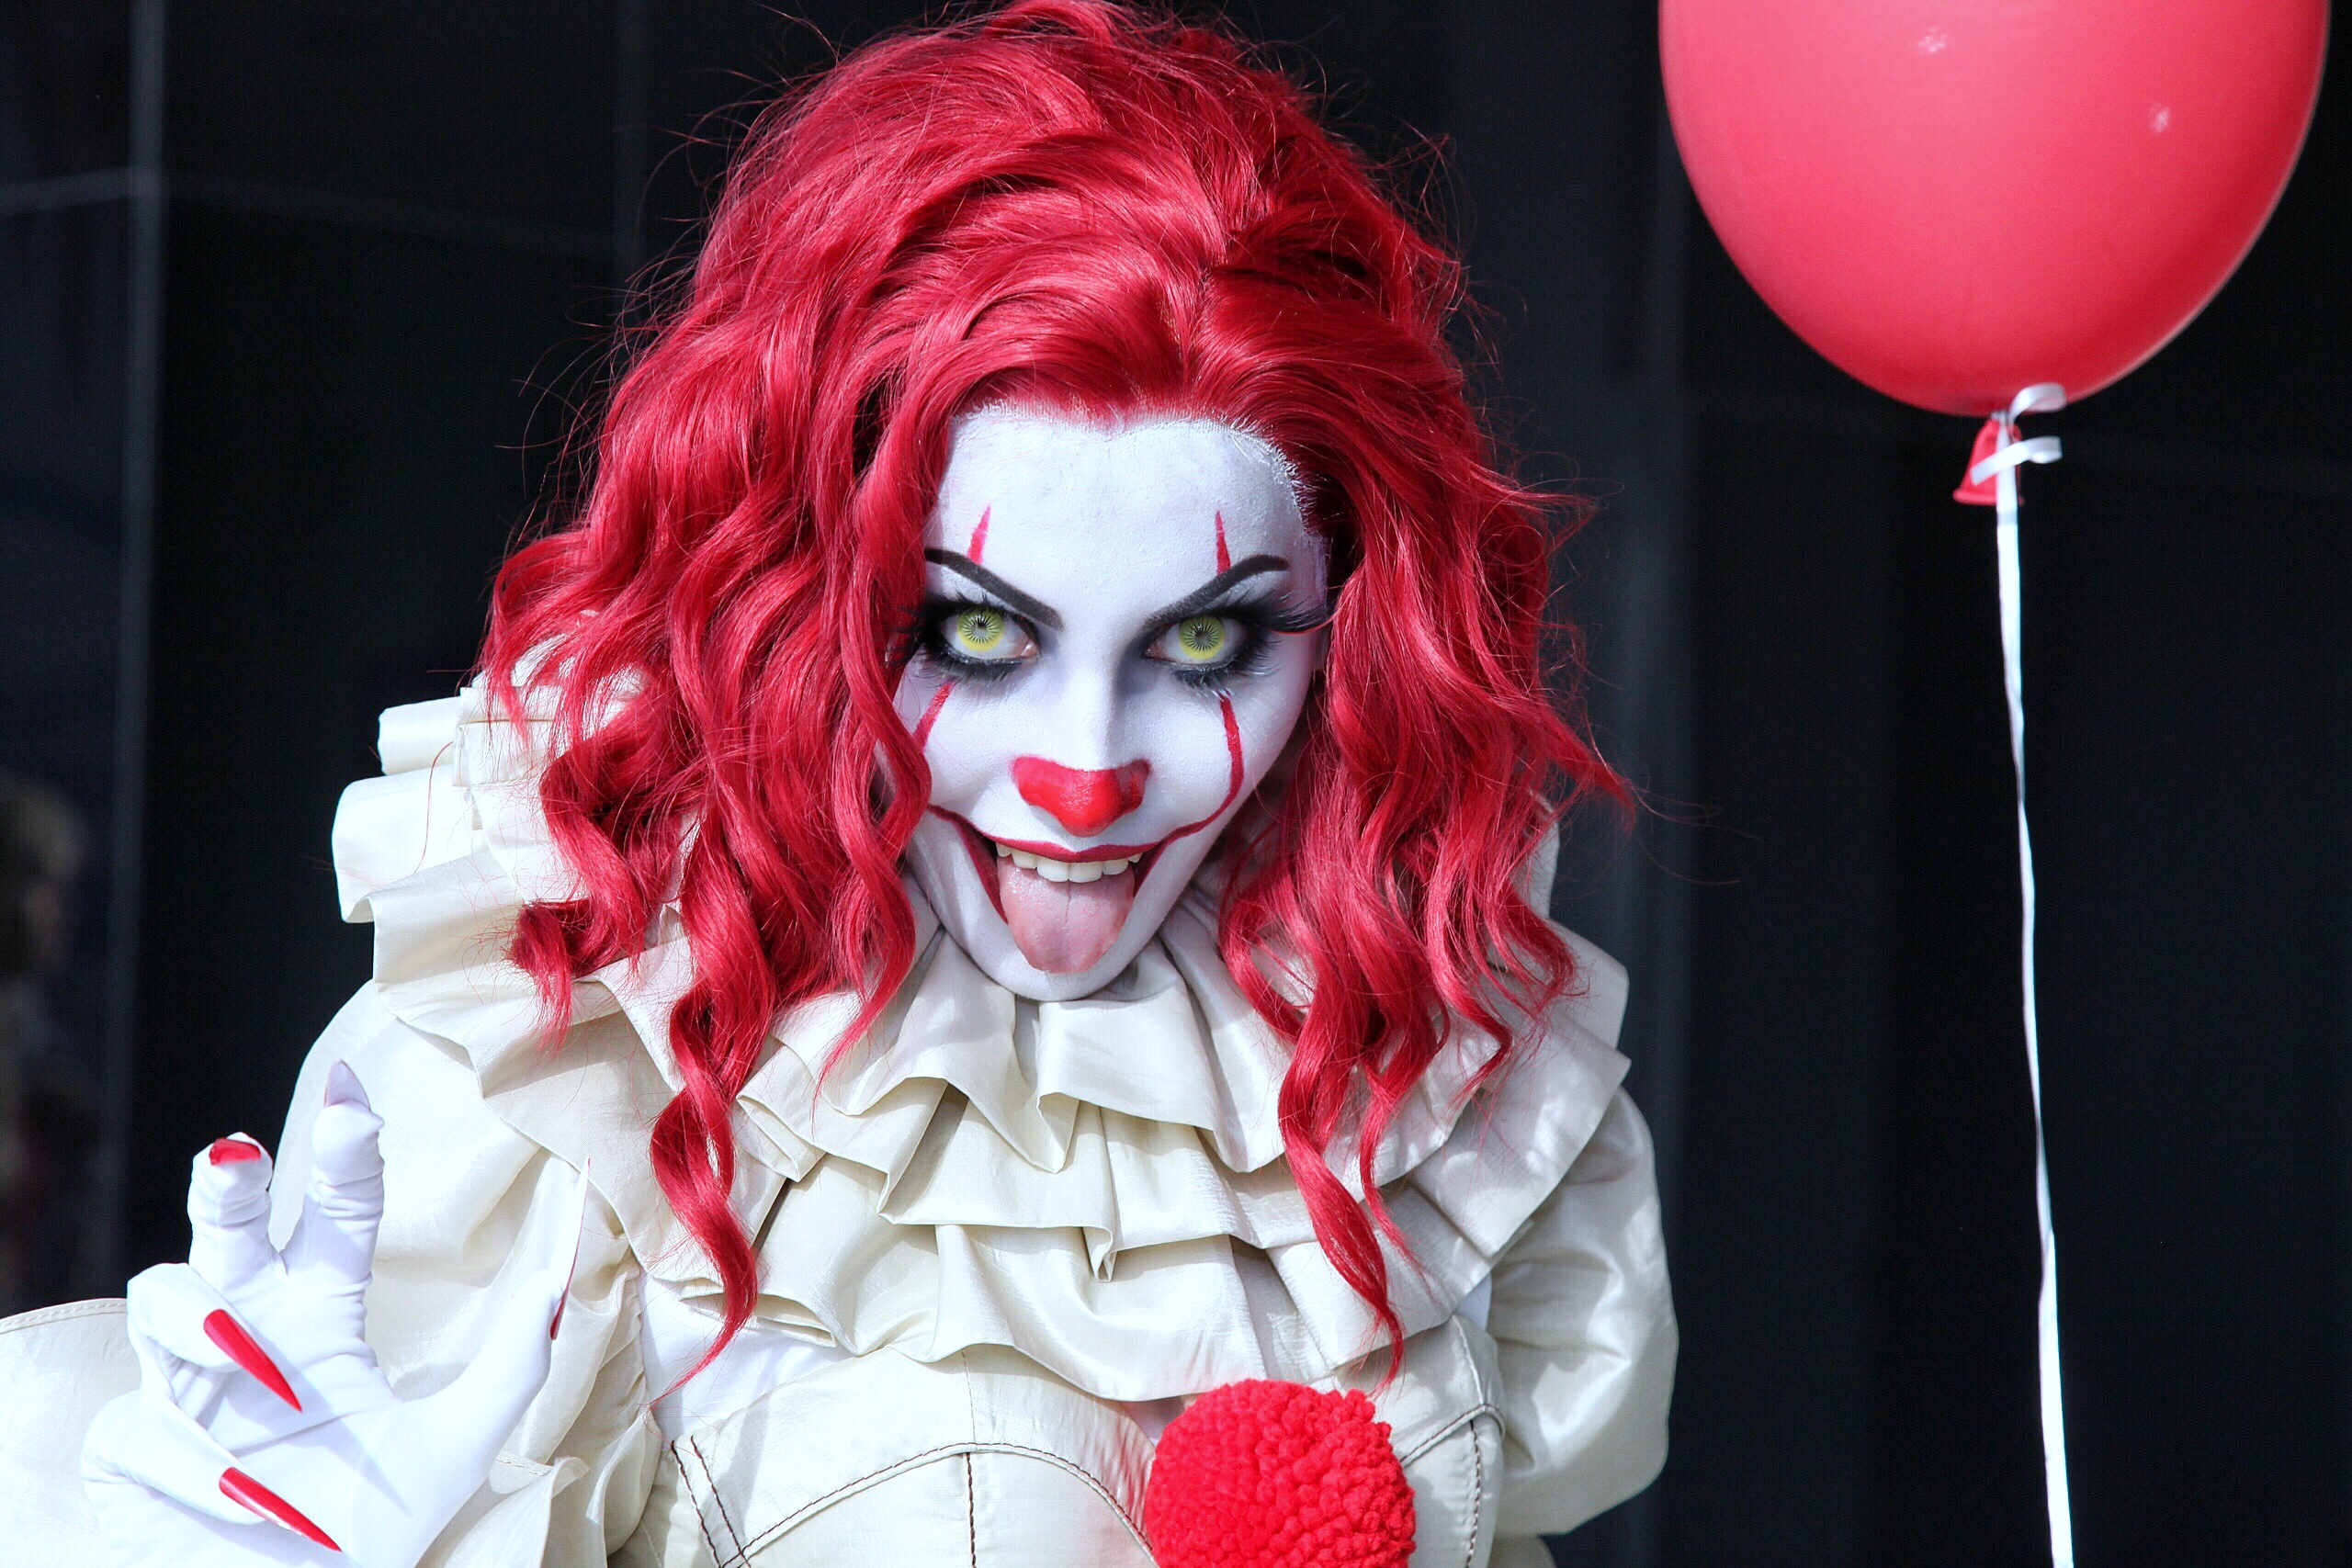 pennywise (it), women, cosplay, balloon, clown, red hair